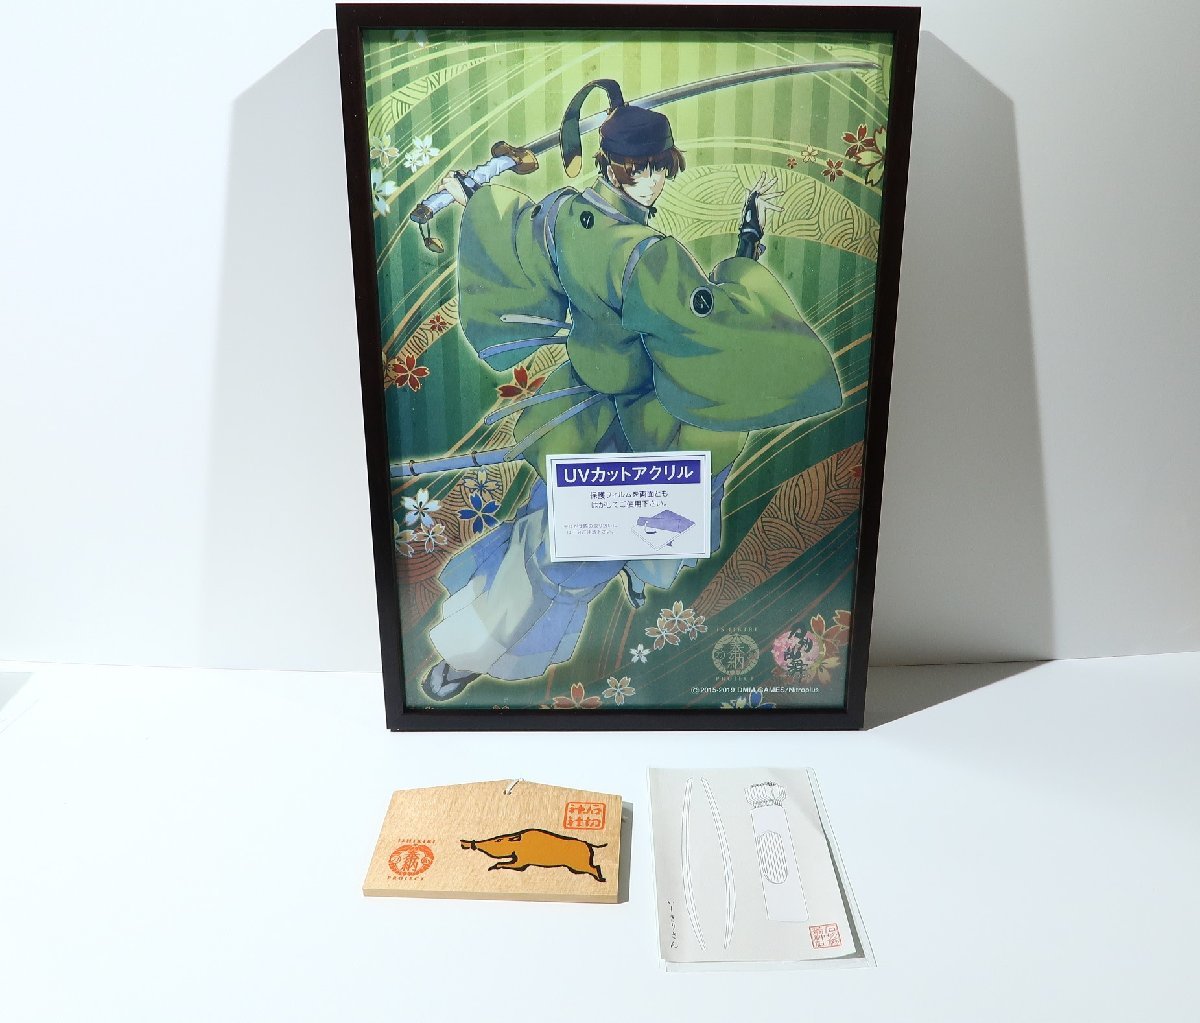  Touken Ranbu stone cut circle two anniversary commemoration festival .. made original picture amount entering stone cut .. god company Project with logo . horse ... postcard 